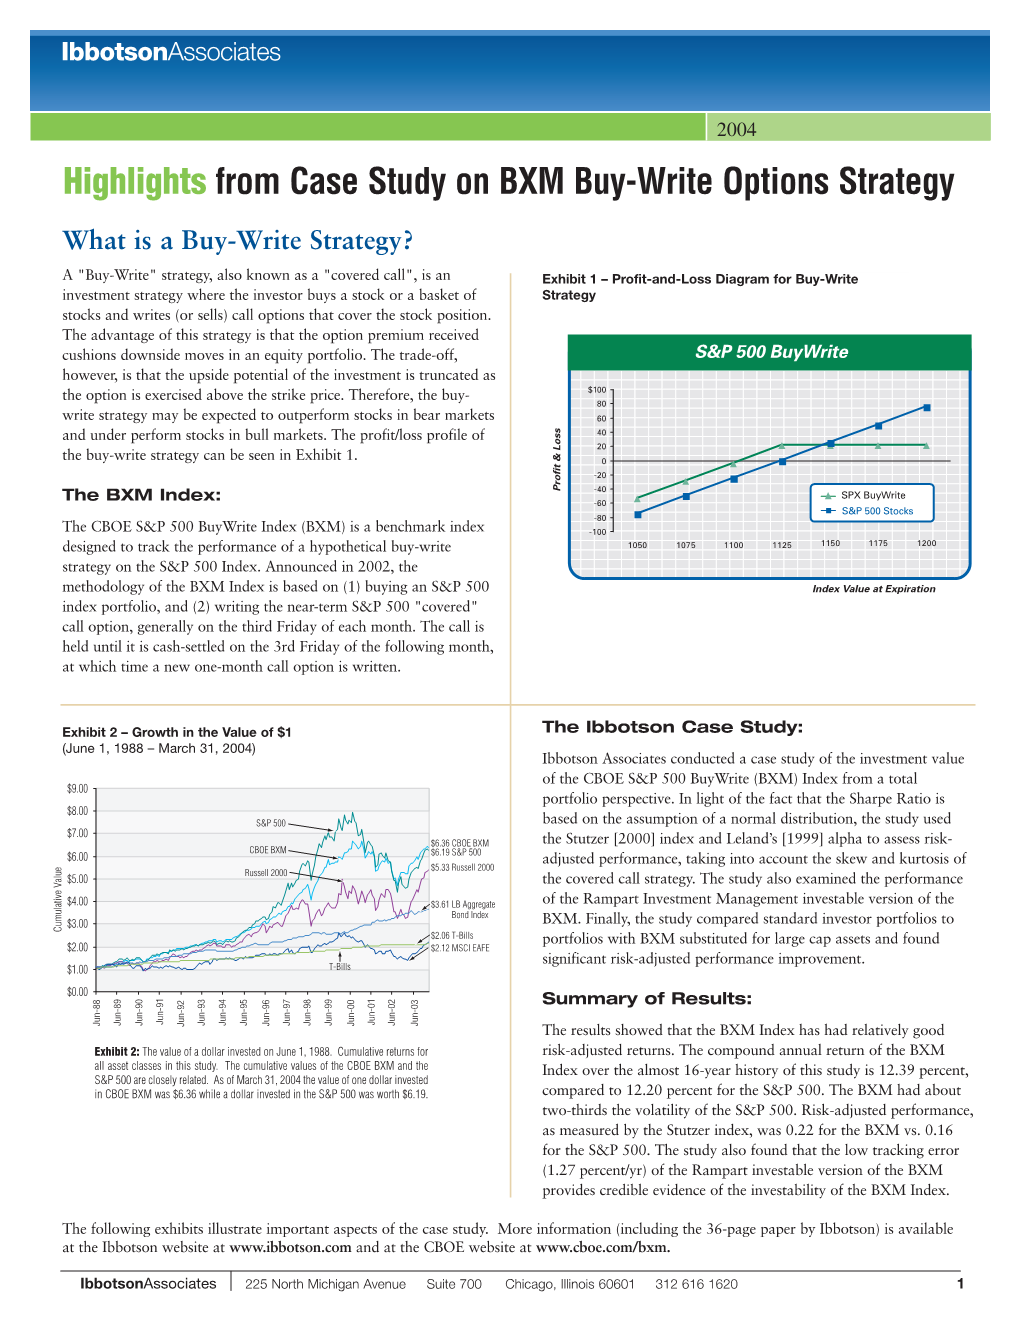 Ibbotson Associates Conducted a Case Study of the Investment Value of the CBOE S&P 500 Buywrite (BXM) Index from a Total Portfolio Perspective